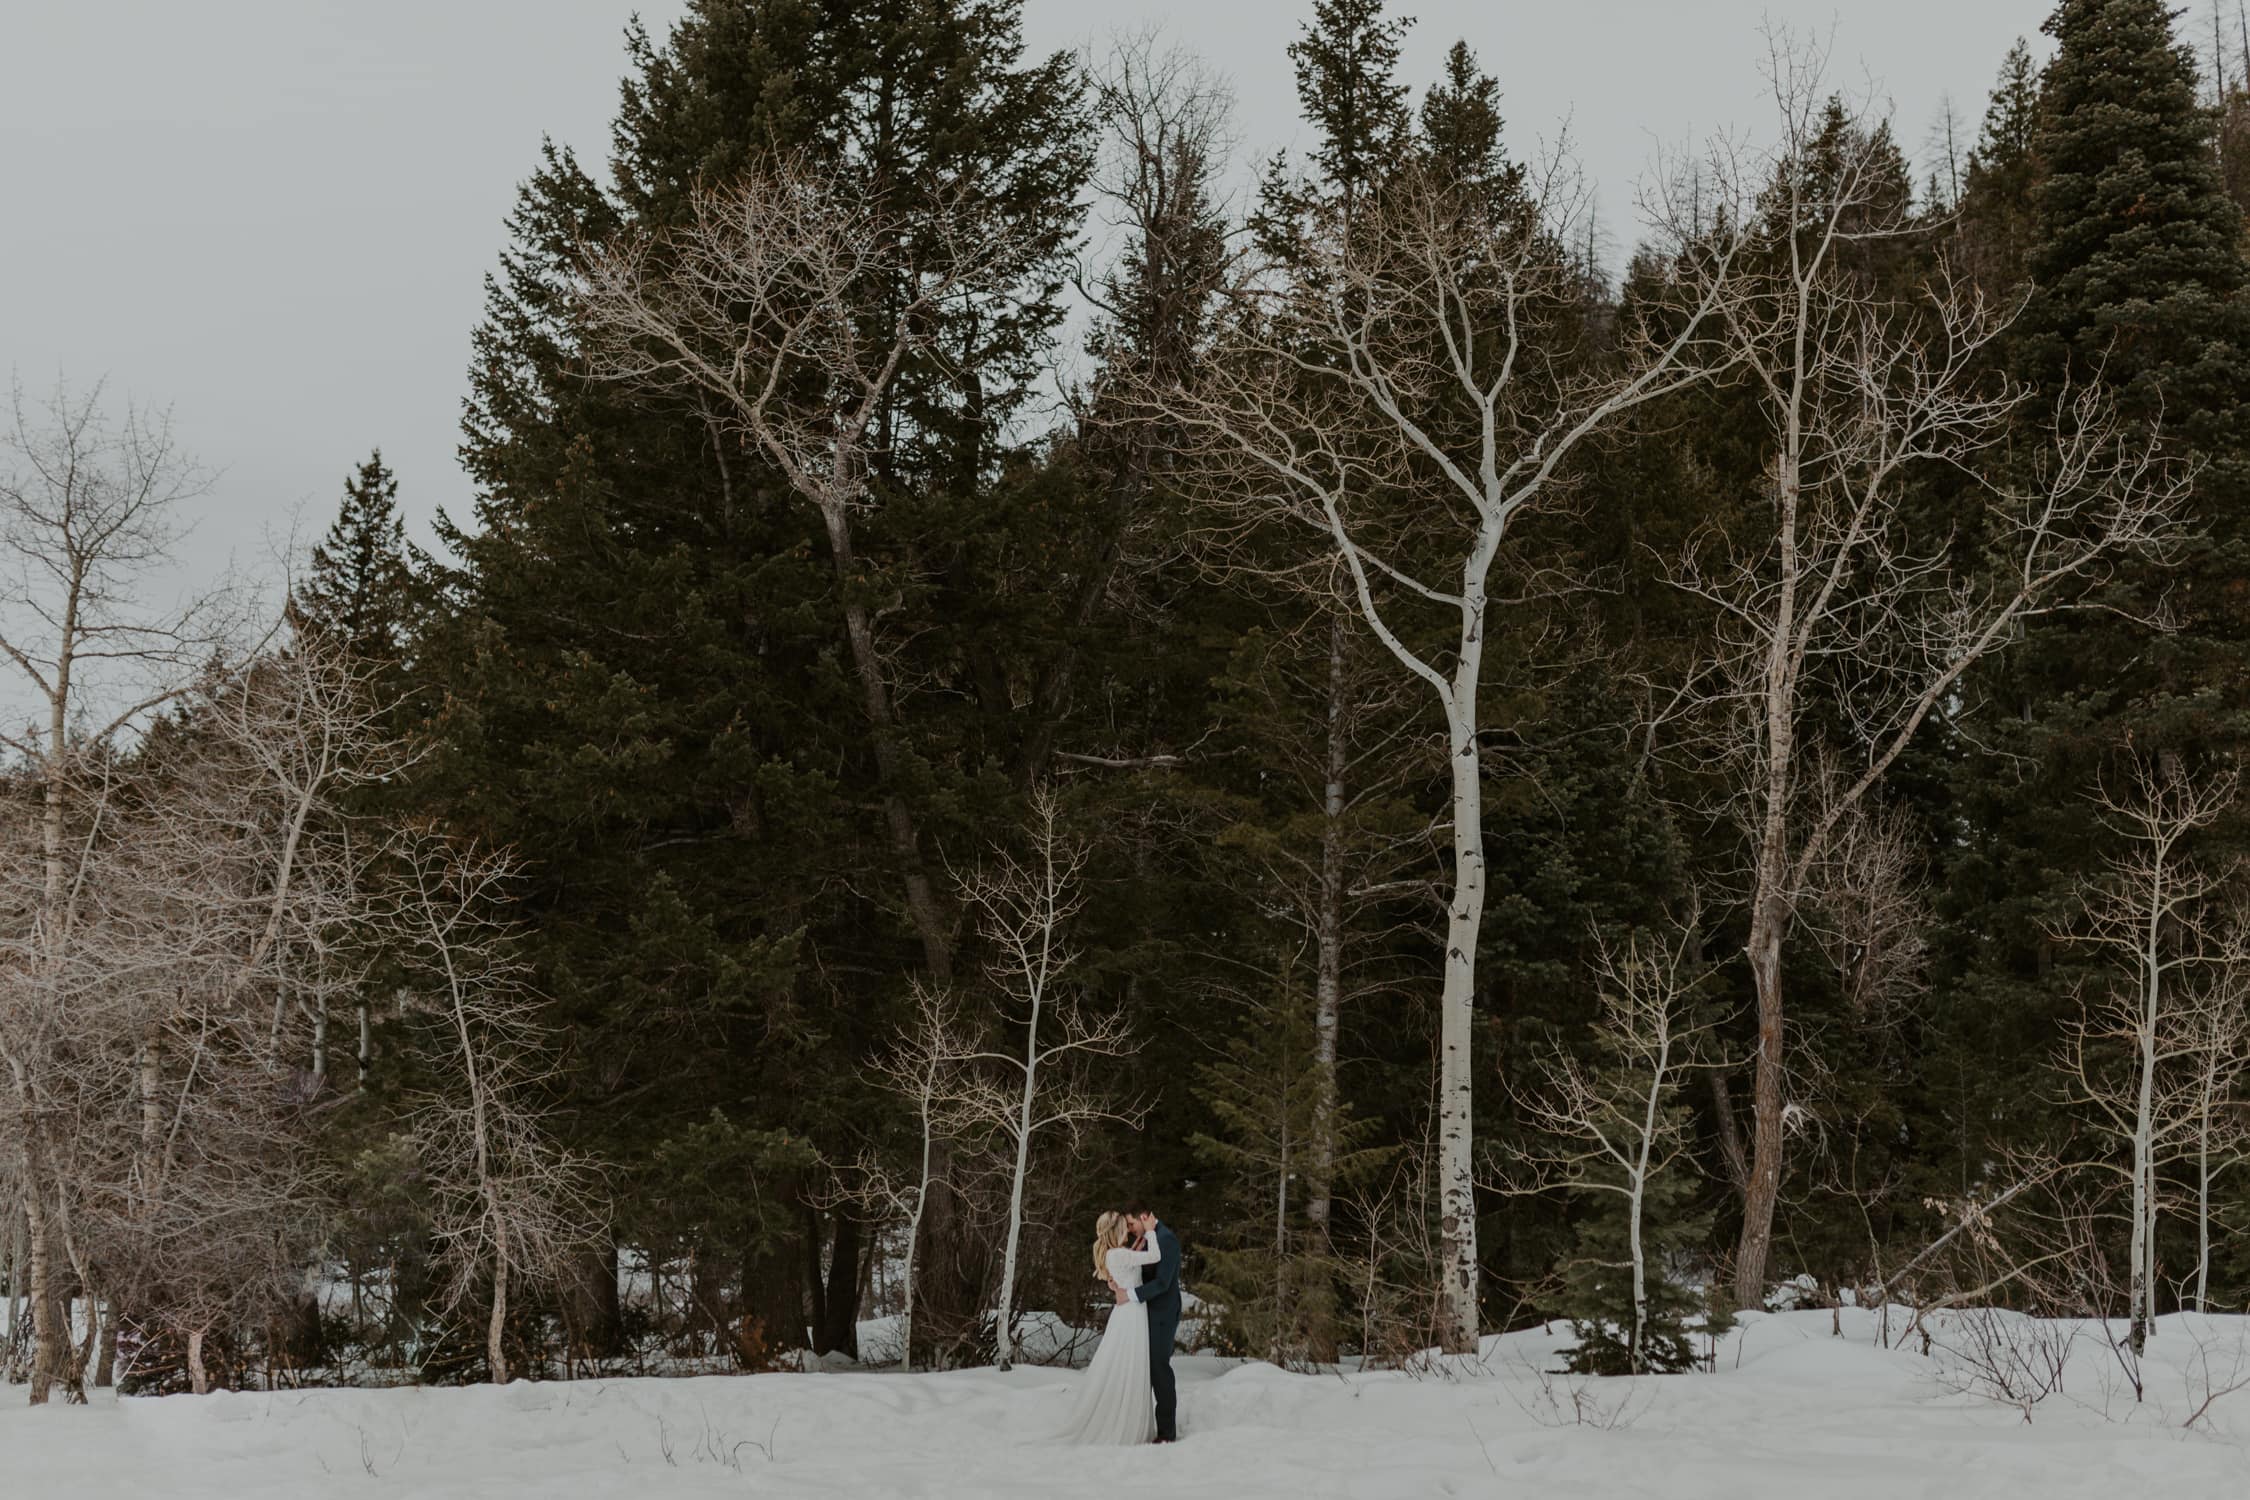 A bride and groom hugging in the snow on their elopement day.